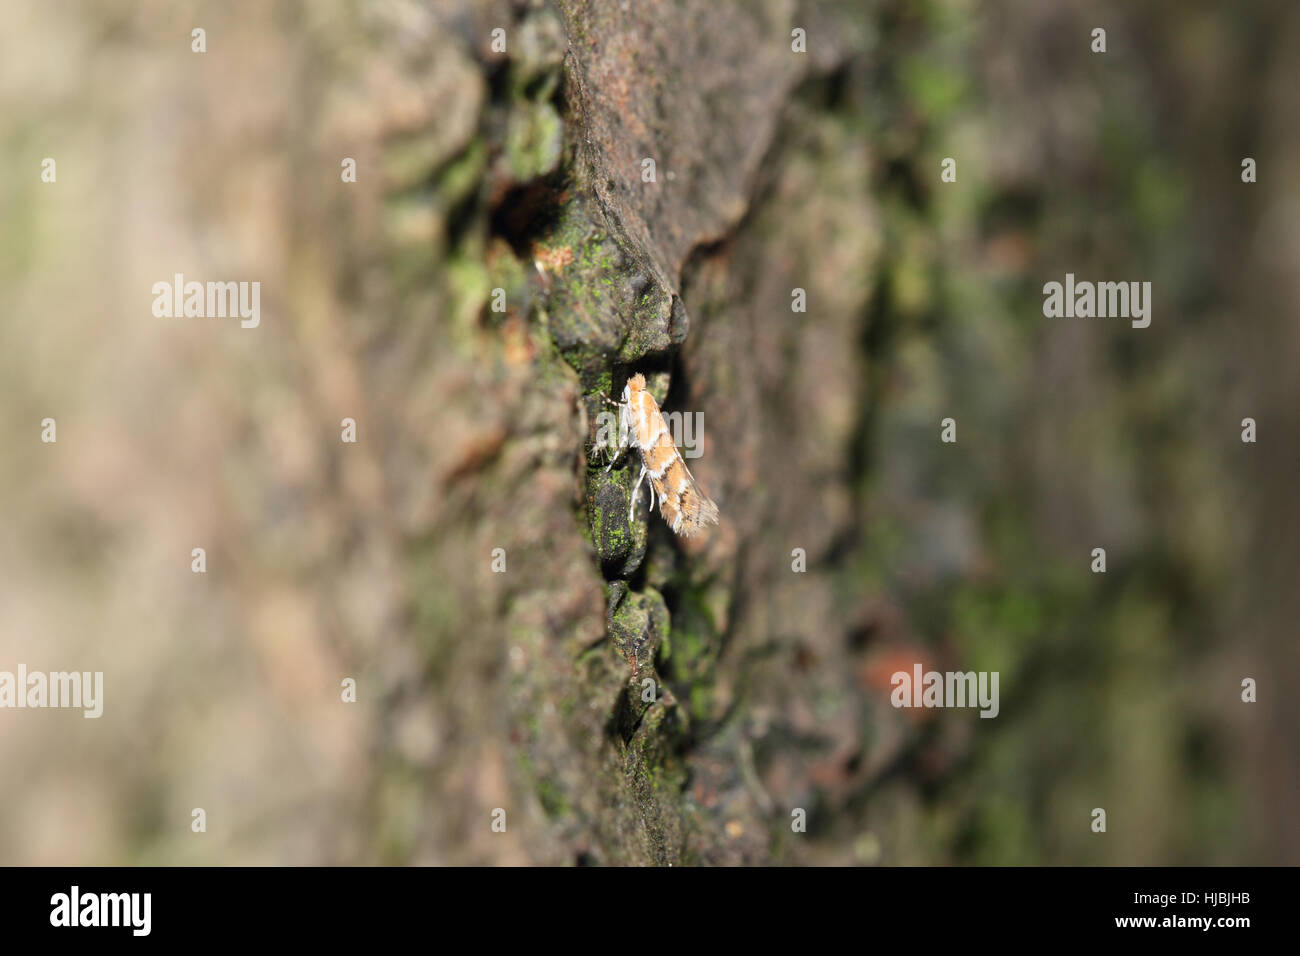 Horse-chestnut Leaf-miner (Cameraria ohridella), a tiny orange micro-moth and pest, sitting on the trunk of horse-chestnut tree Stock Photo